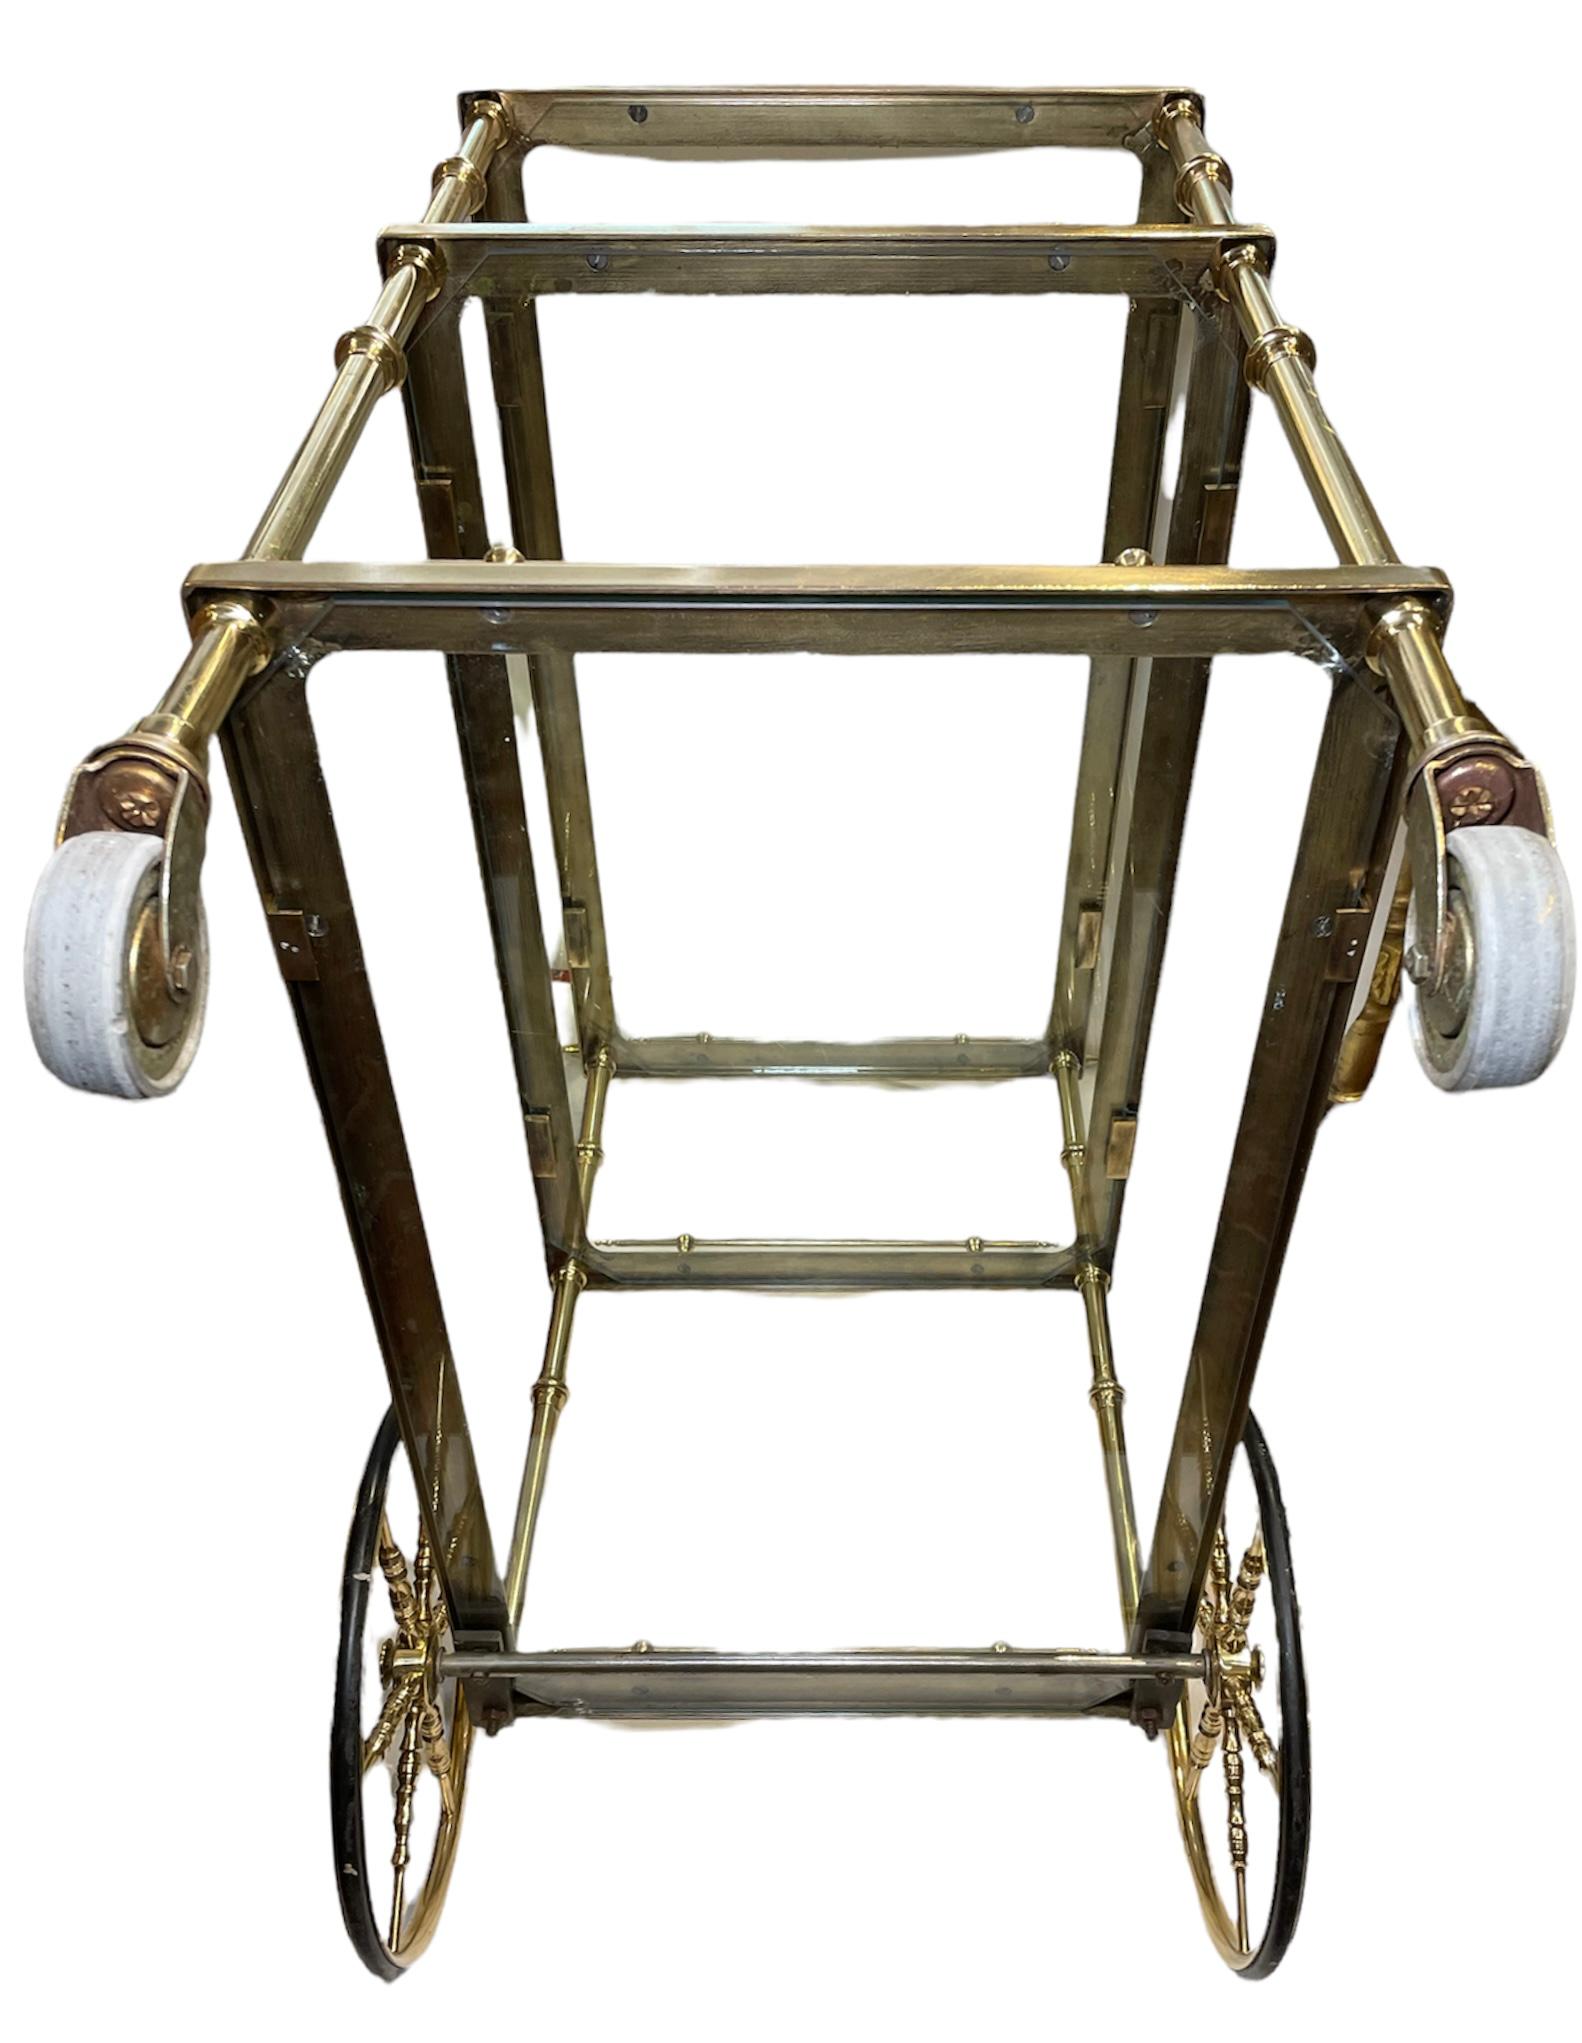 This is a three tiers bar cart. It depicts a gilt bronze cart with three original rectangular glass tiers supported in each corner by four cylindrical tubes. Each one of the tier has a gilt gallery made of thin cylindrical tubes, too. The cart has a